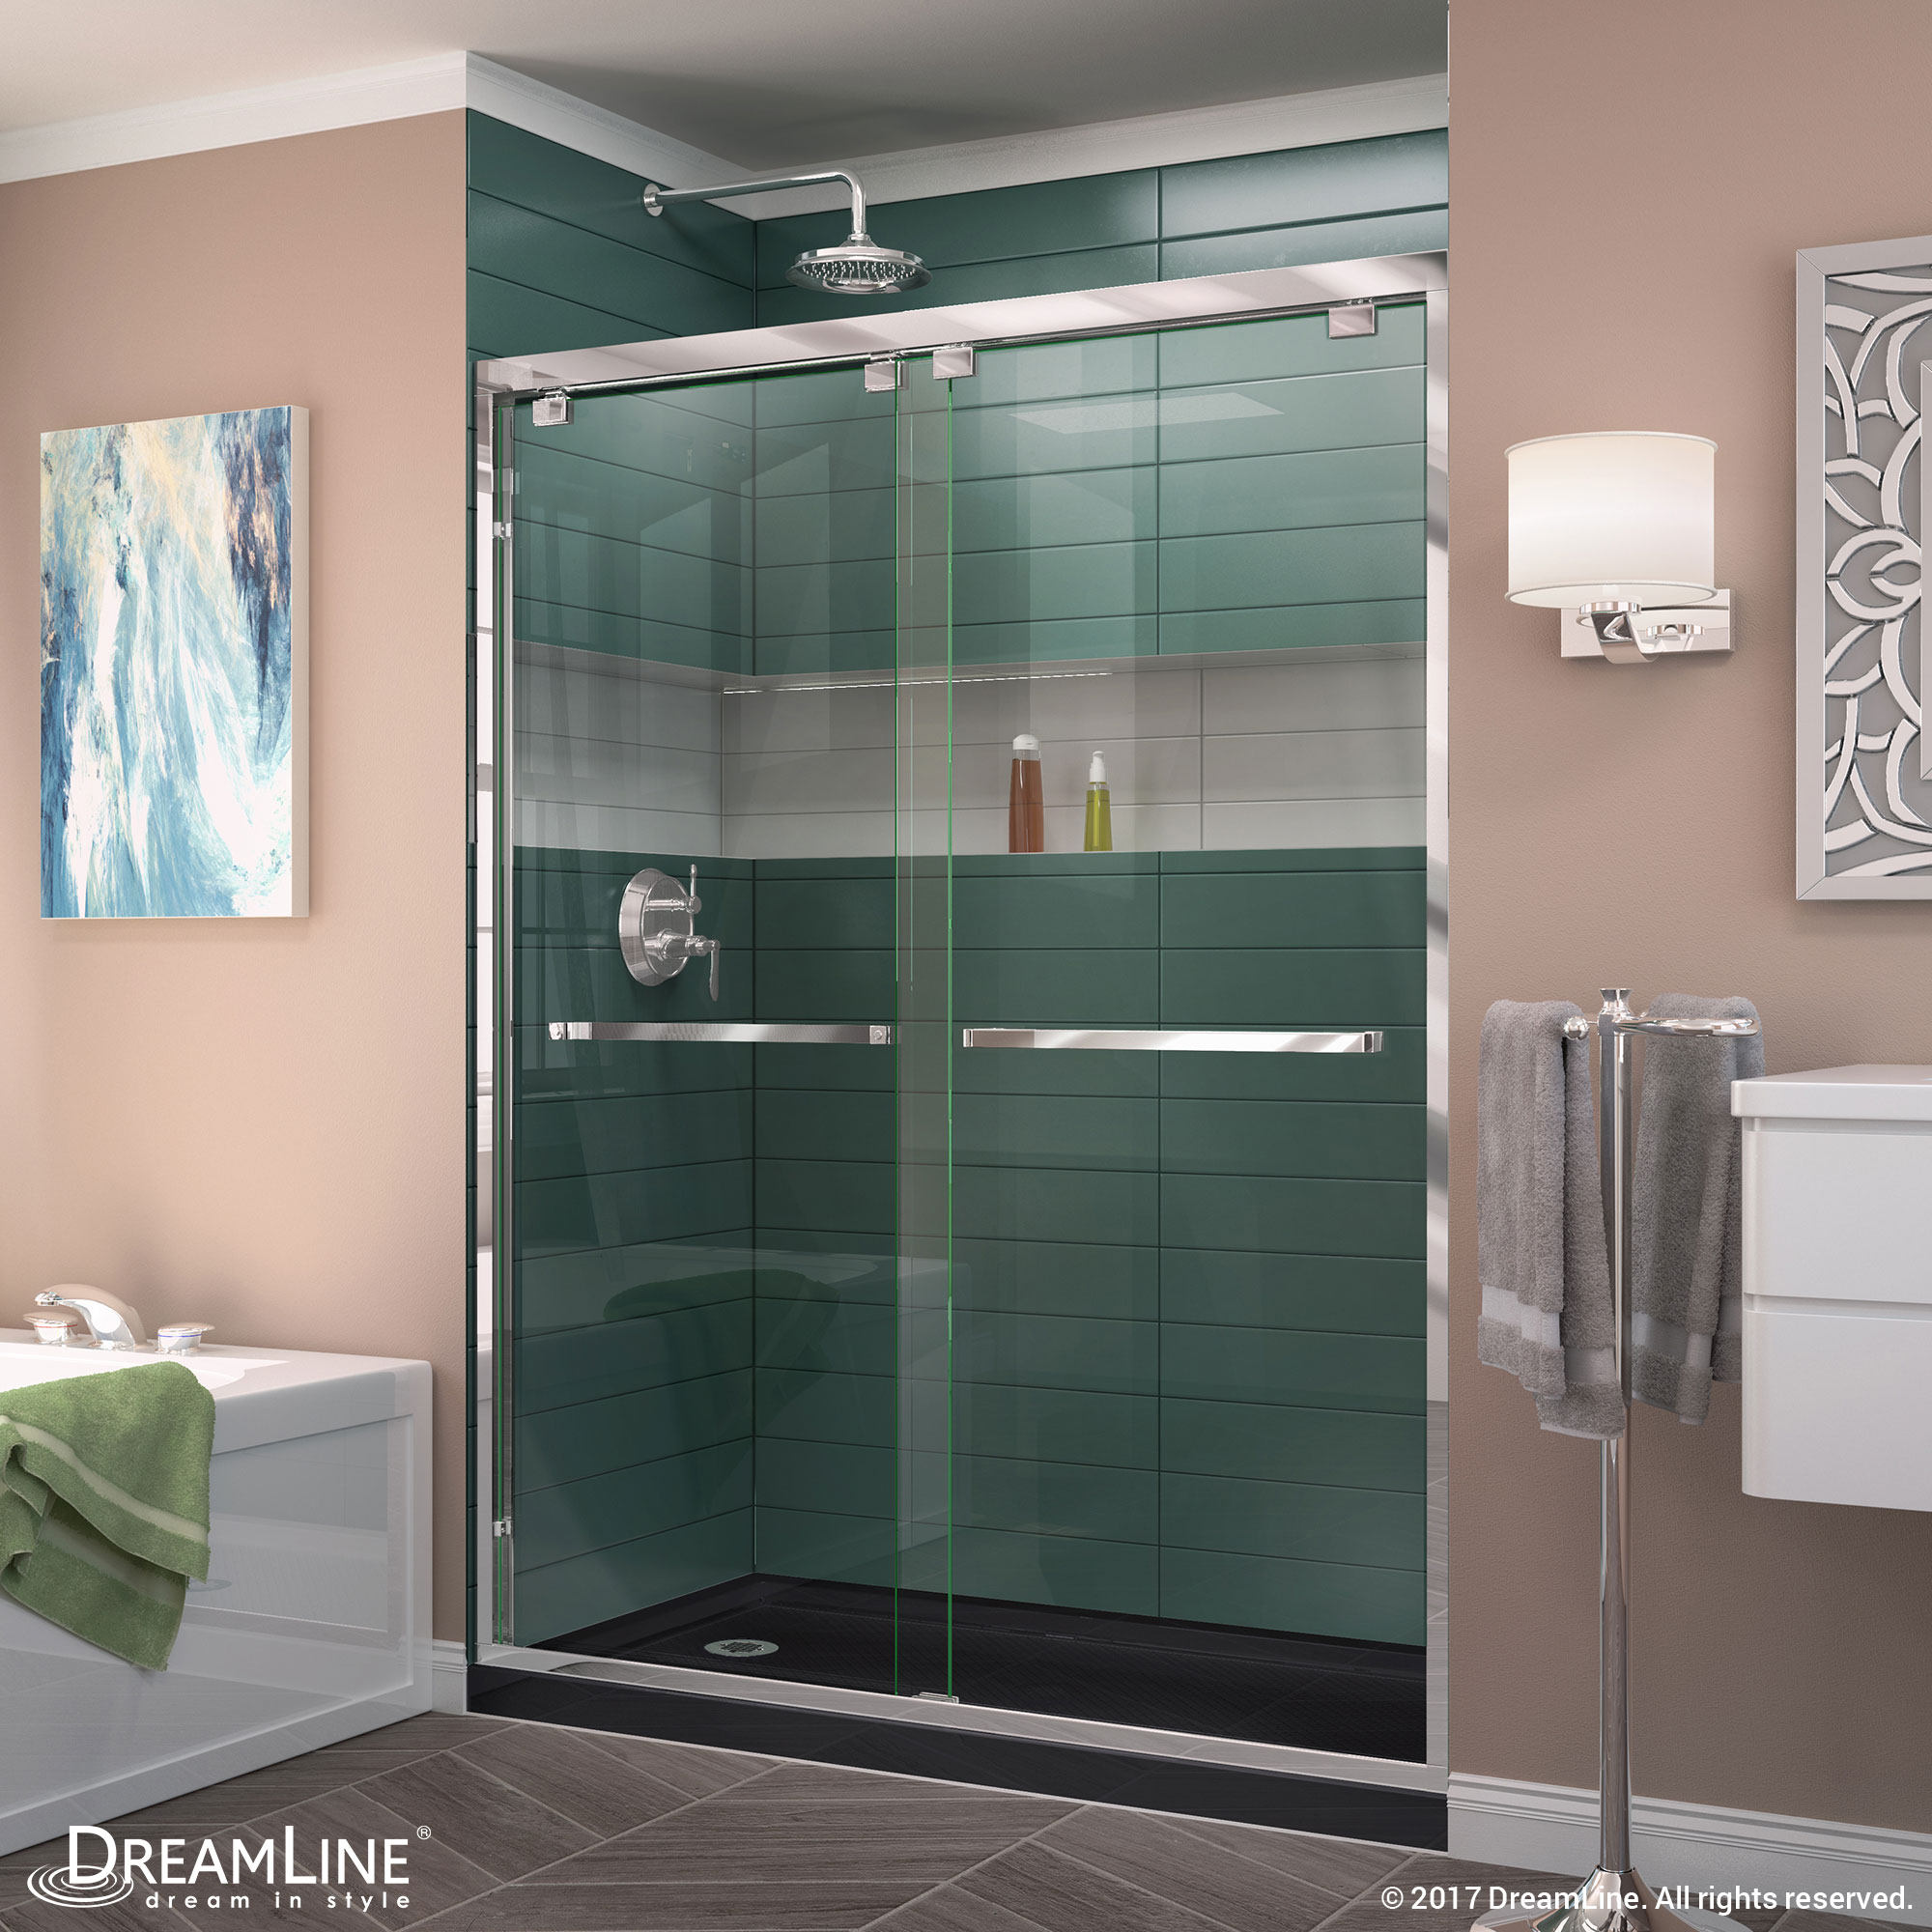 DreamLine Encore 30 in. D x 60 in. W x 78 3/4 in. H Bypass Shower Door in Oil Rubbed Bronze and Left Drain Biscuit Base Kit